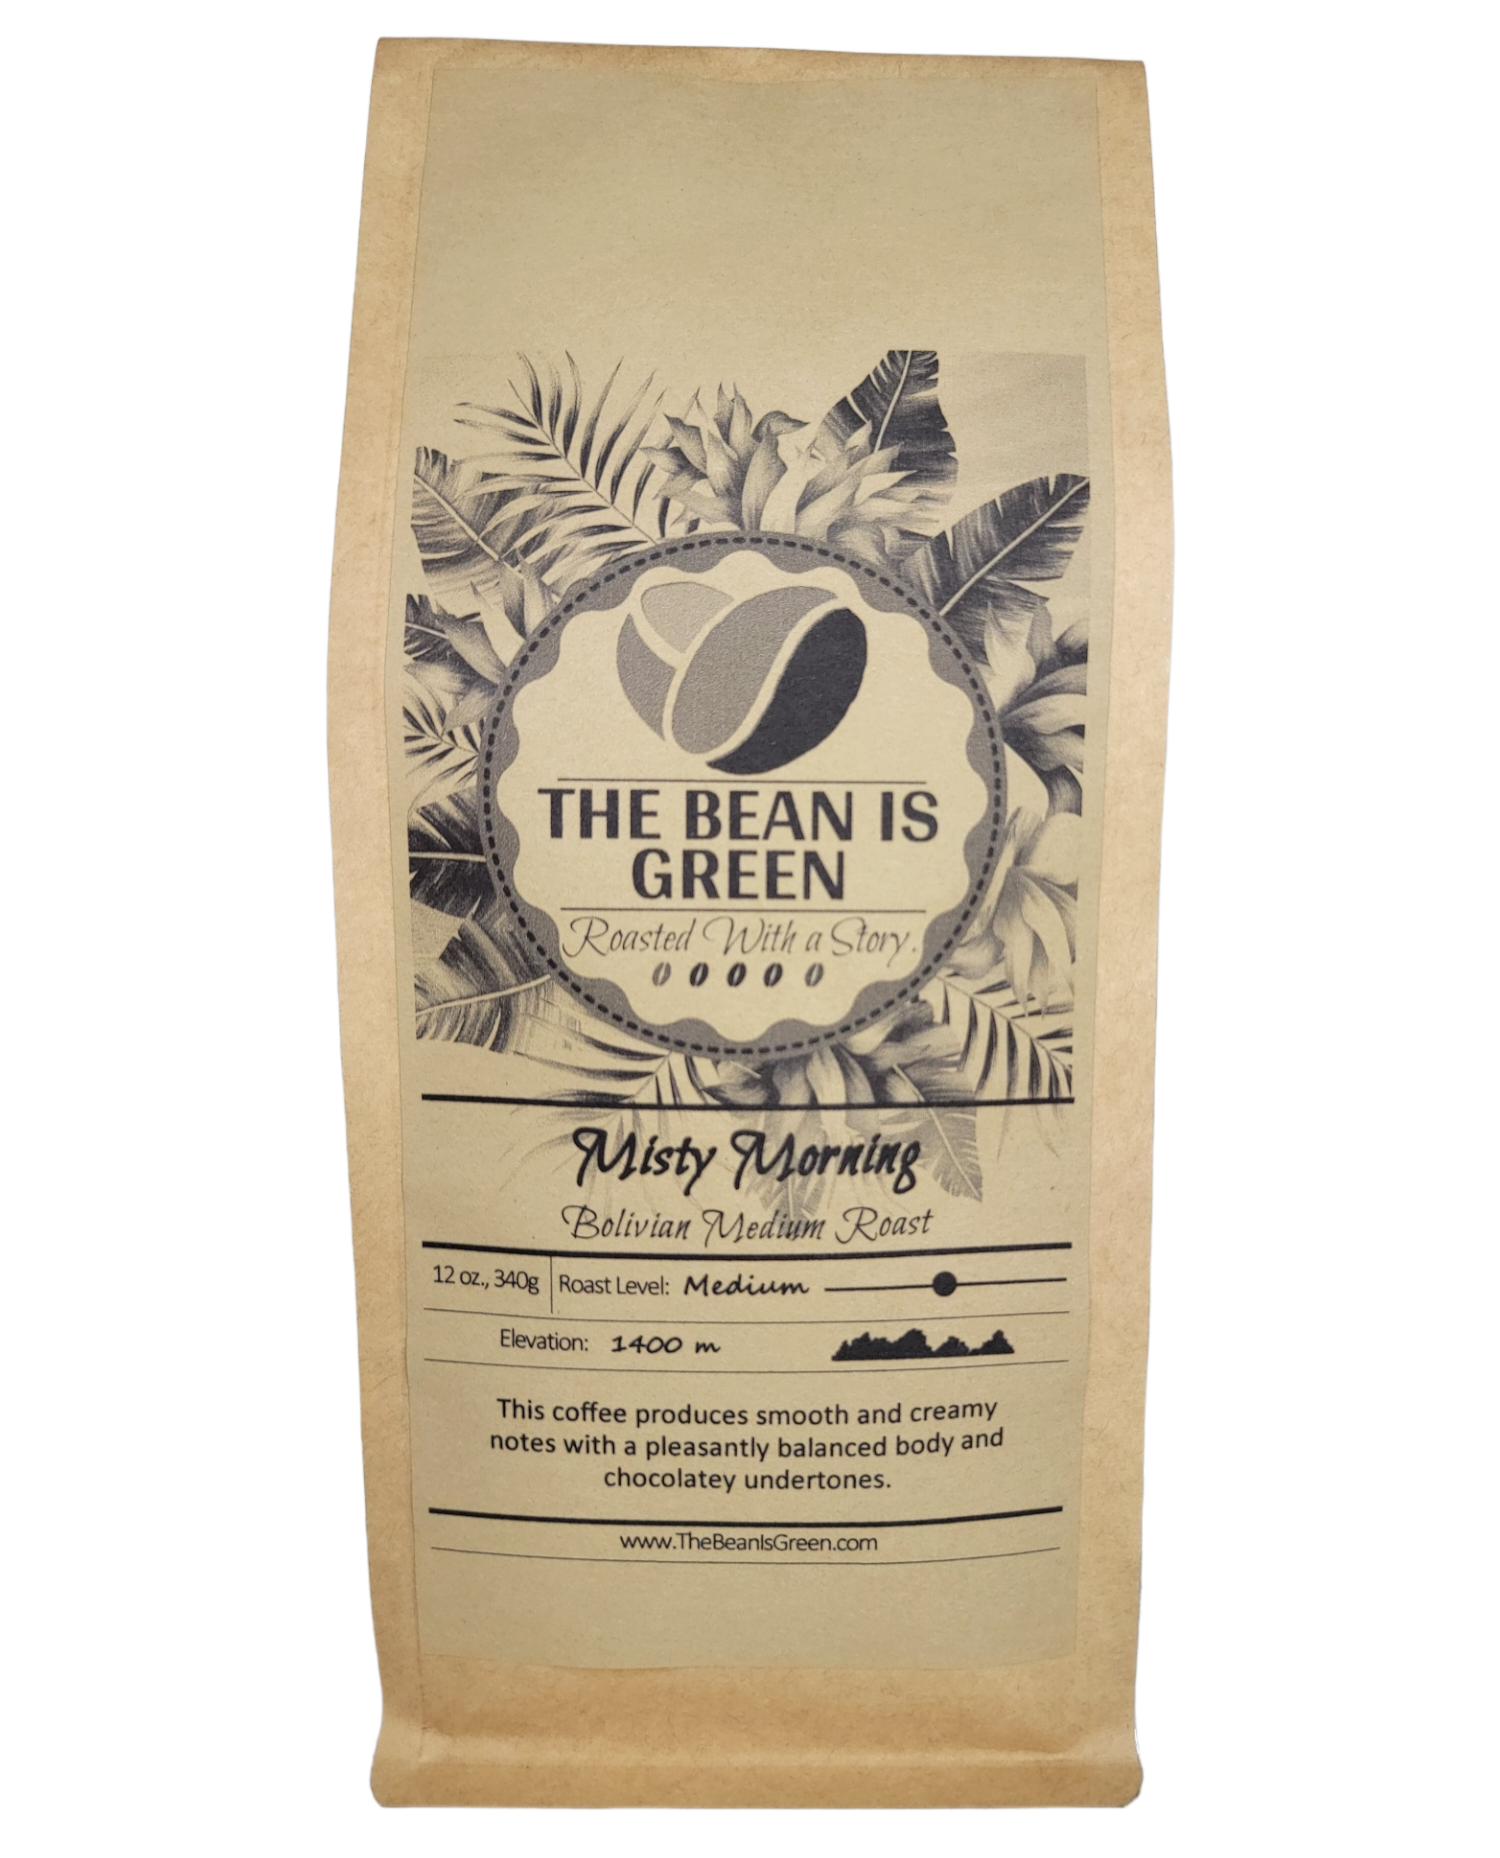 Brown kraft bag with The Bean Is Green grey-wash tropical logo. Misty Morning - Organic Bolivian Medium Roast Whole Bean Coffee. Elevation 1400m with graph shown. This coffee produces smooth and creamy notes with a pleasantly balanced body and chocolatey undertones. - website = www.thebeanisgreen.com